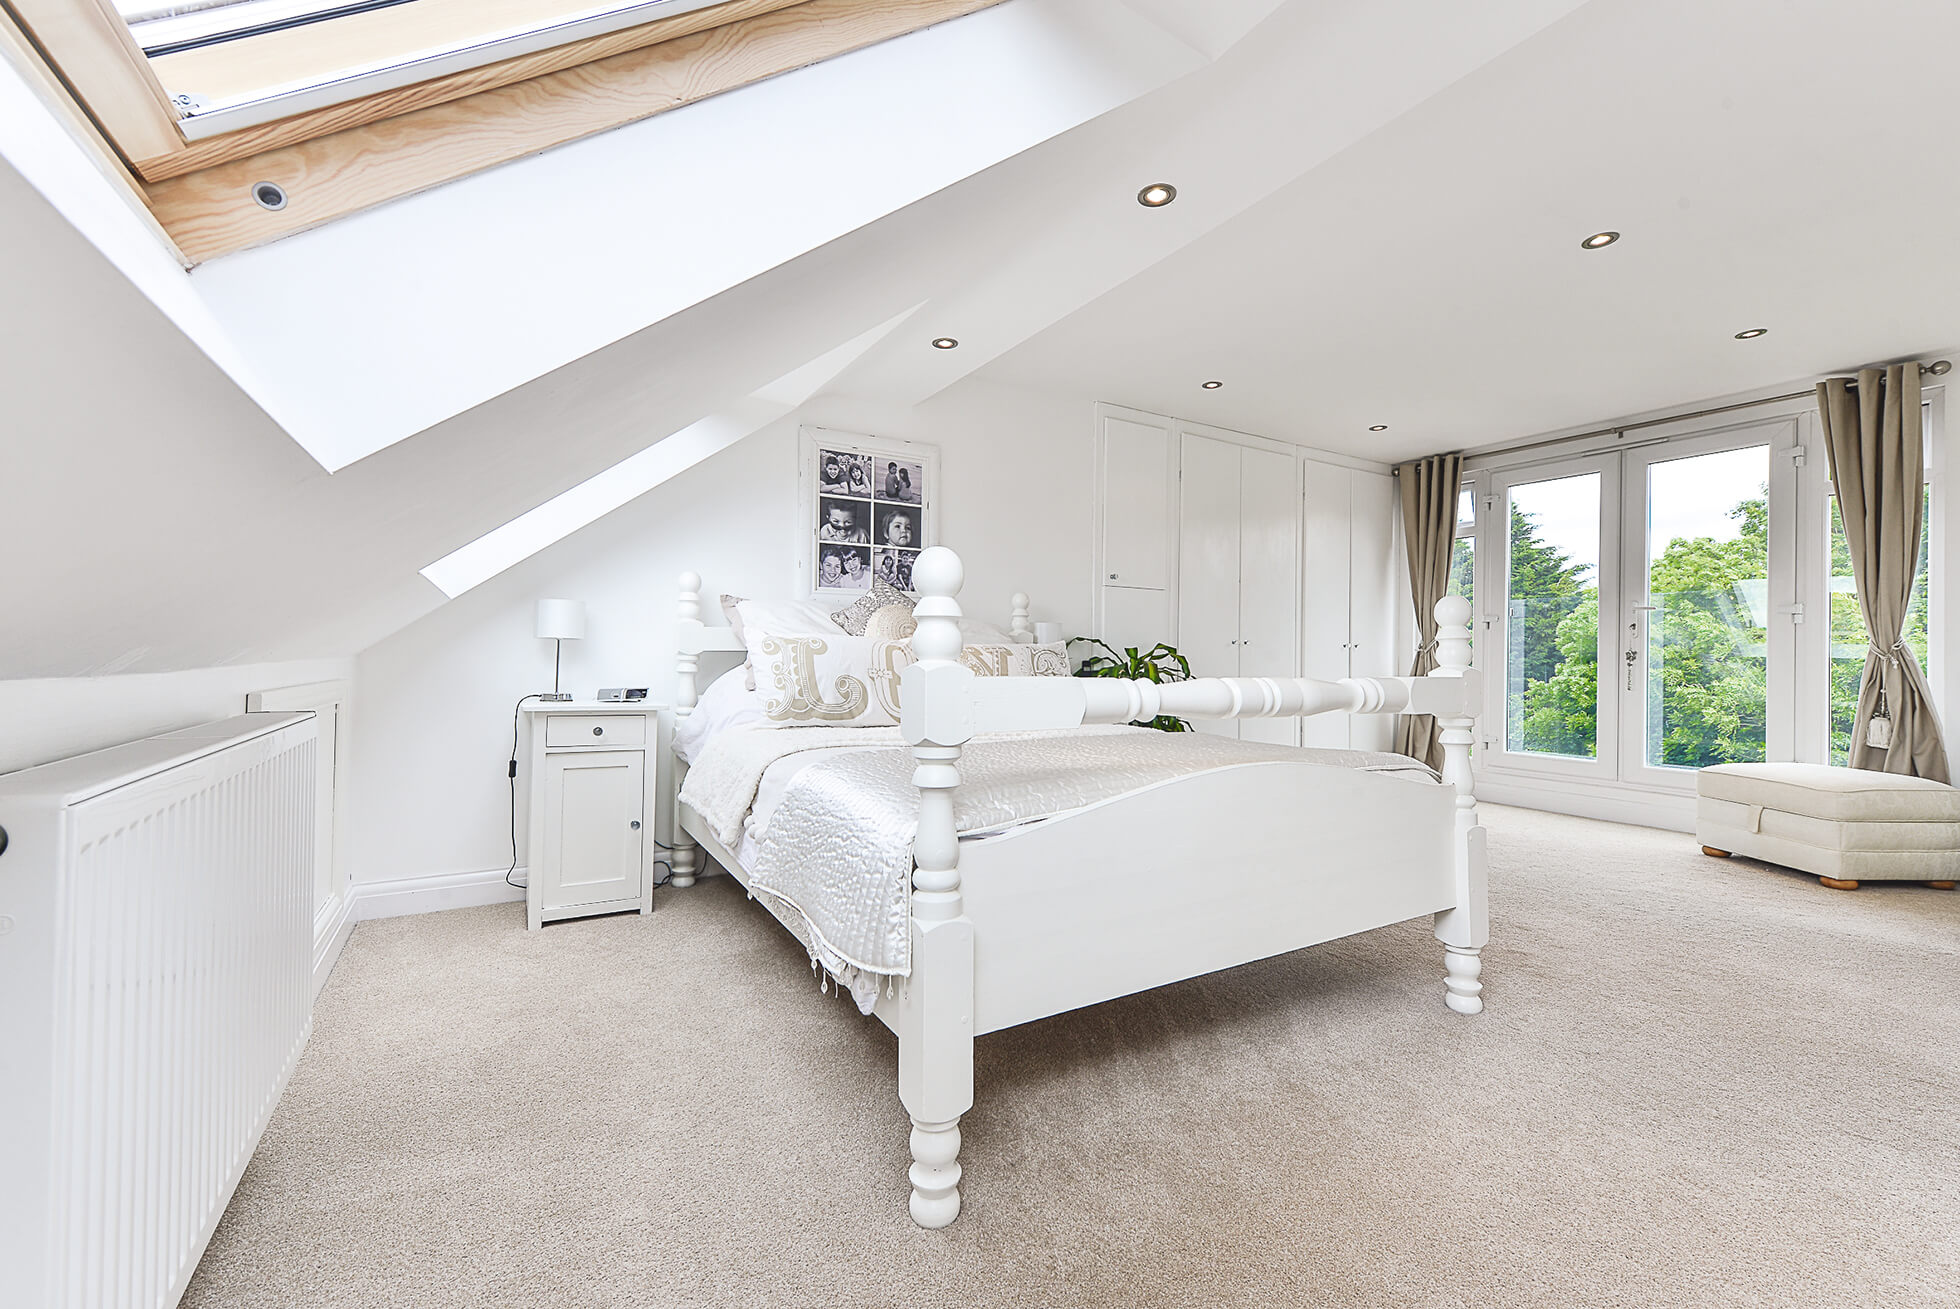 Do you have a question about converting your Loft in Aldbury? Here are the most popular questions asked by our clients.